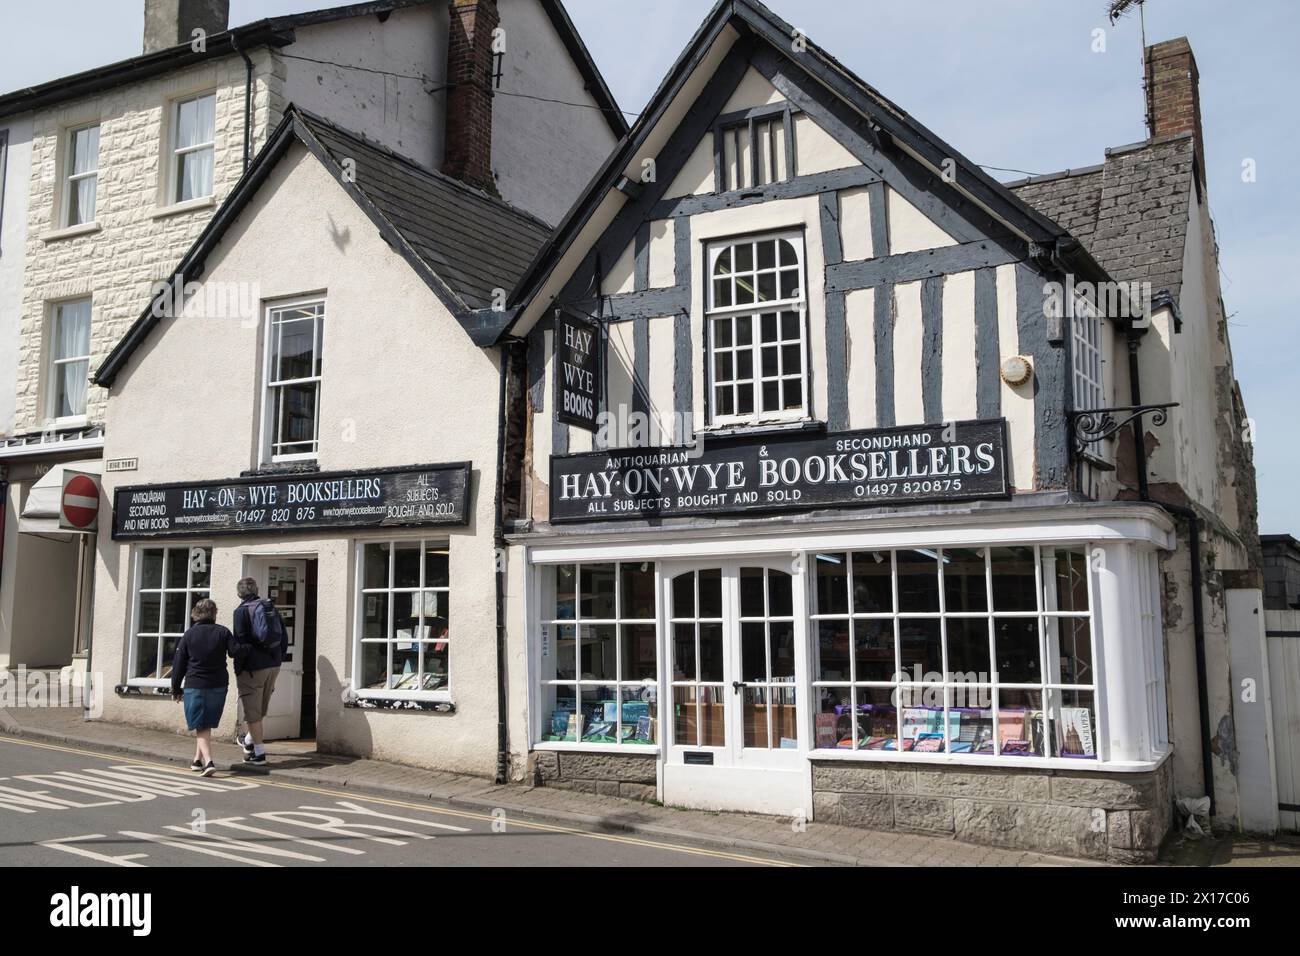 Hay-on-Wye a town of books in Powys Wales UK Hay-on-Wye booksellers shop Stock Photo